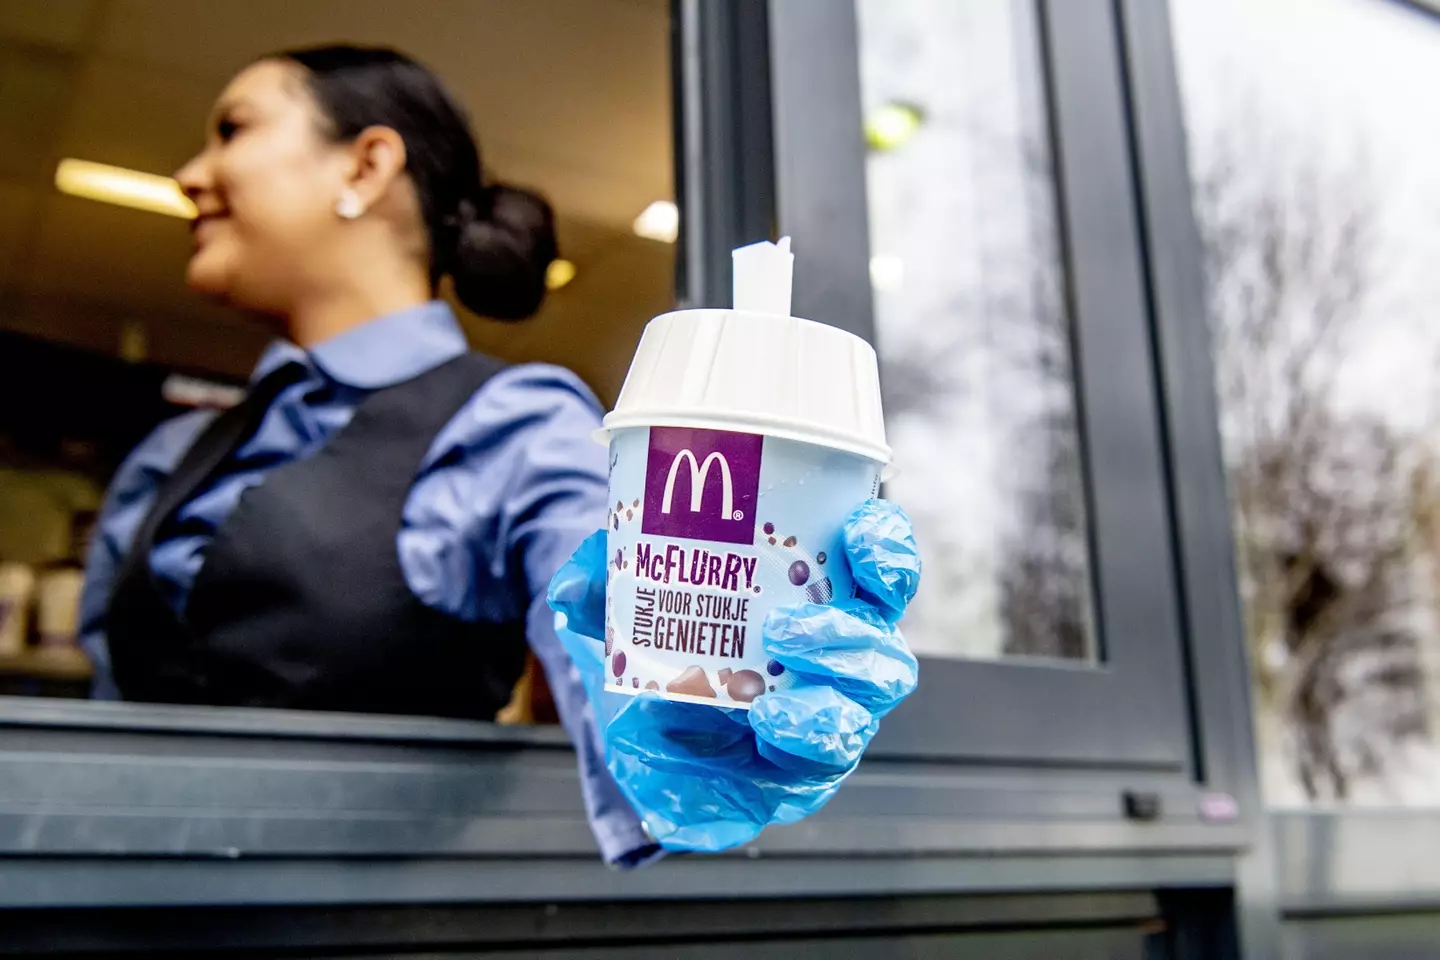 Now, the McFlurry spoon will be made out of paper.